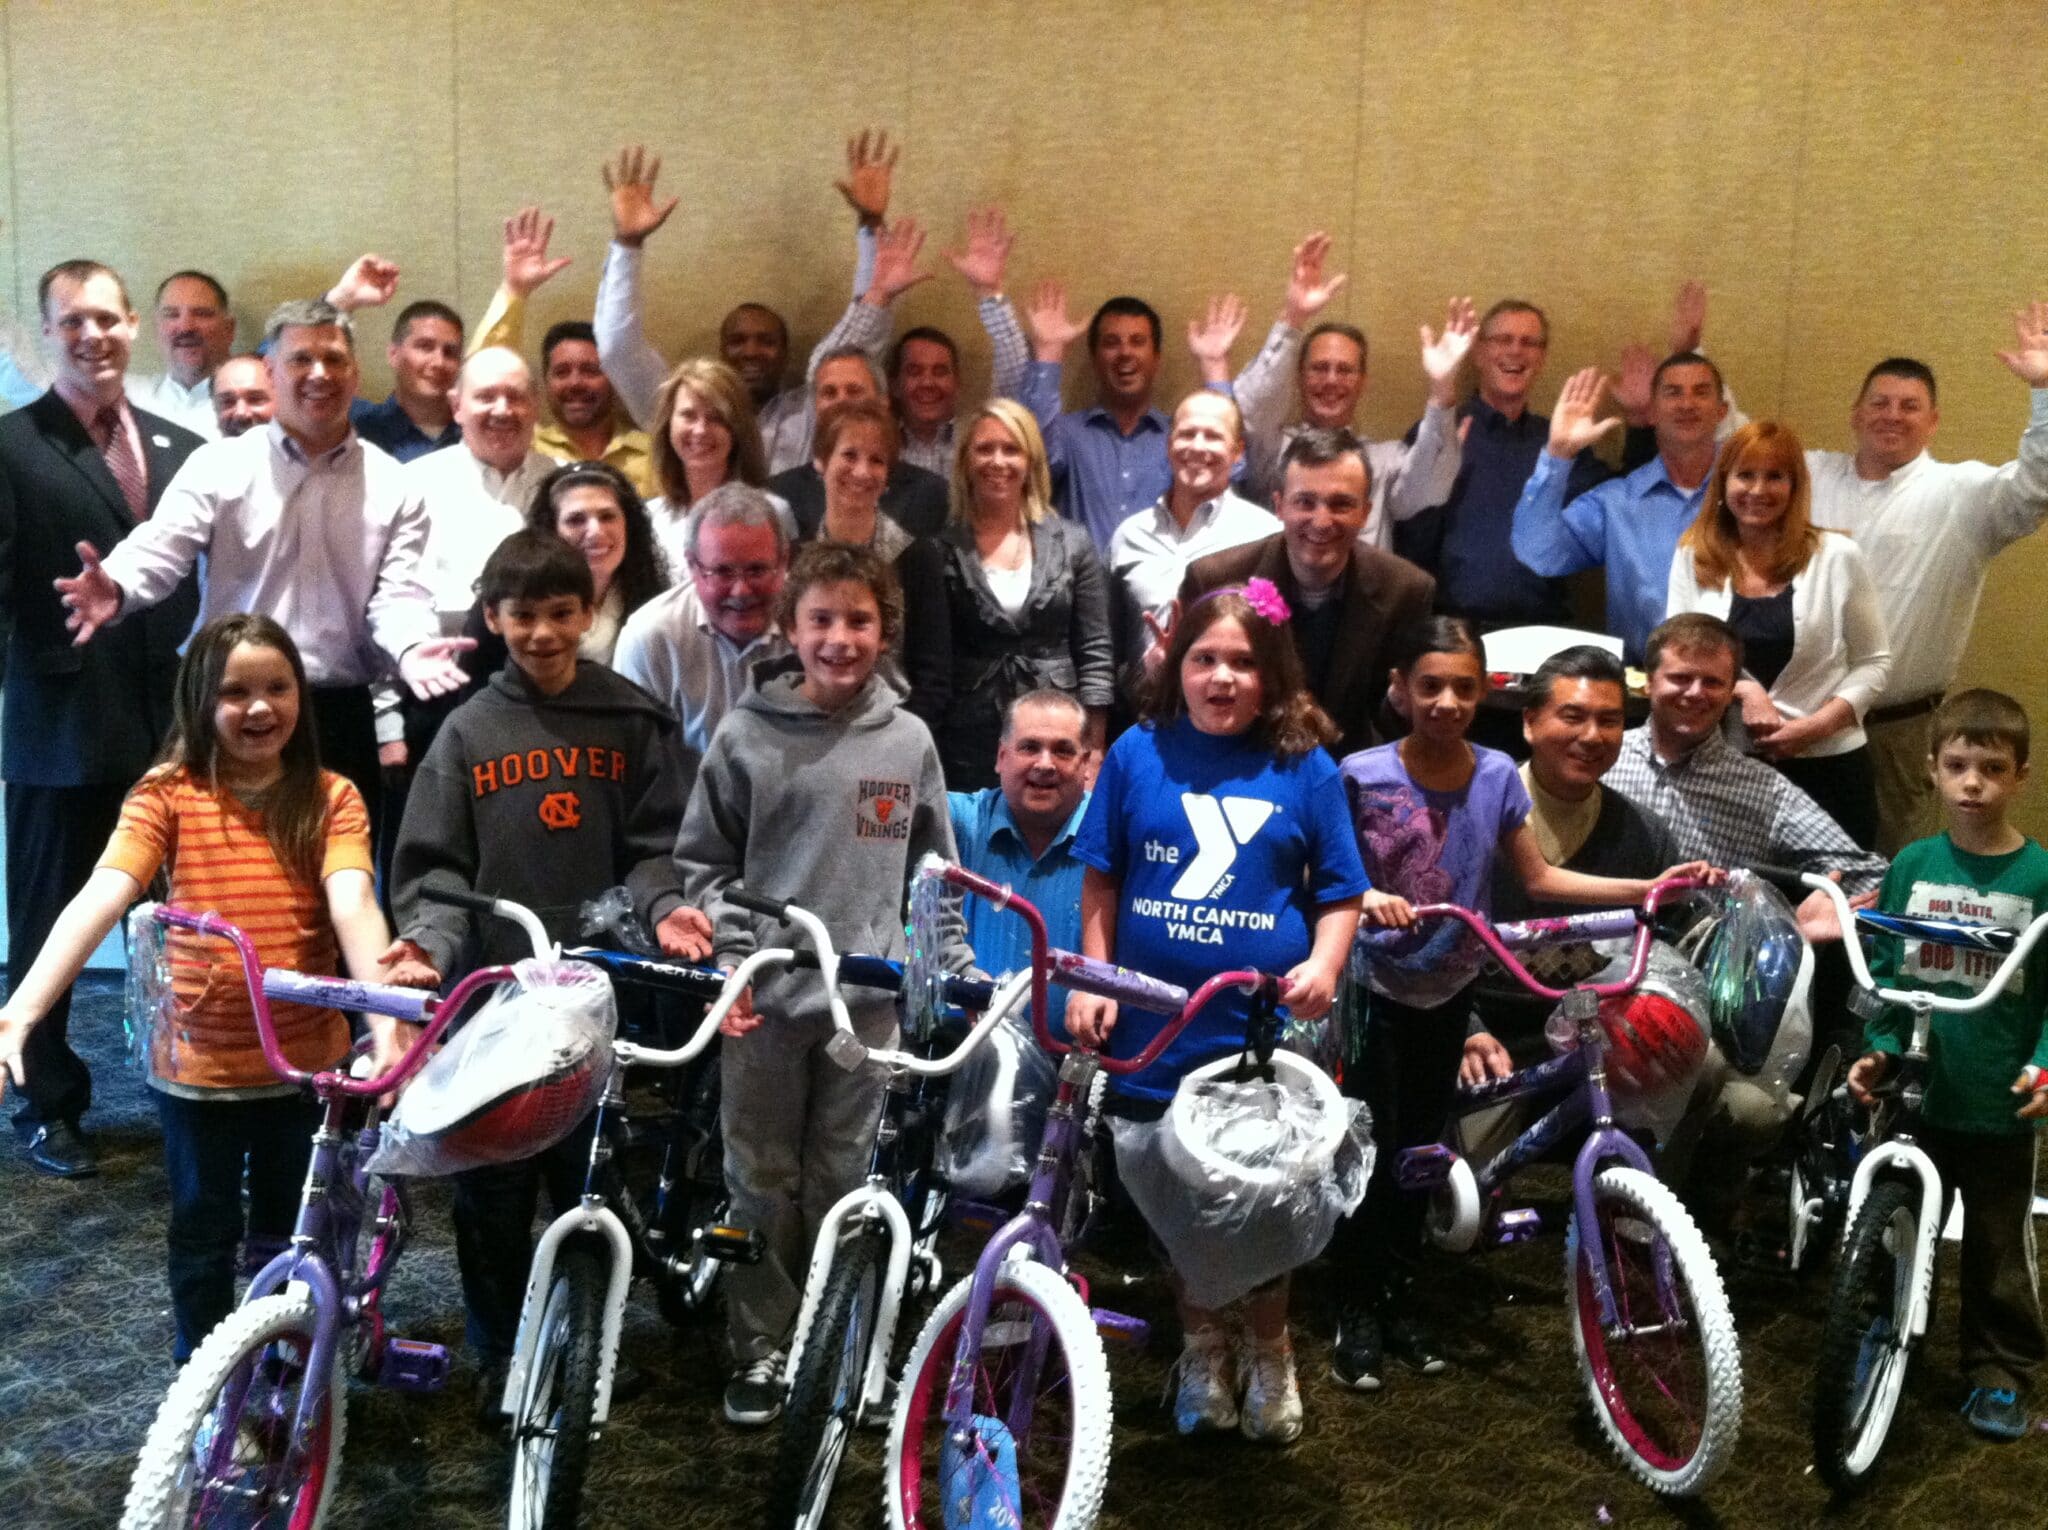 Diebold Build-A-Bike Team Event in Canton OH